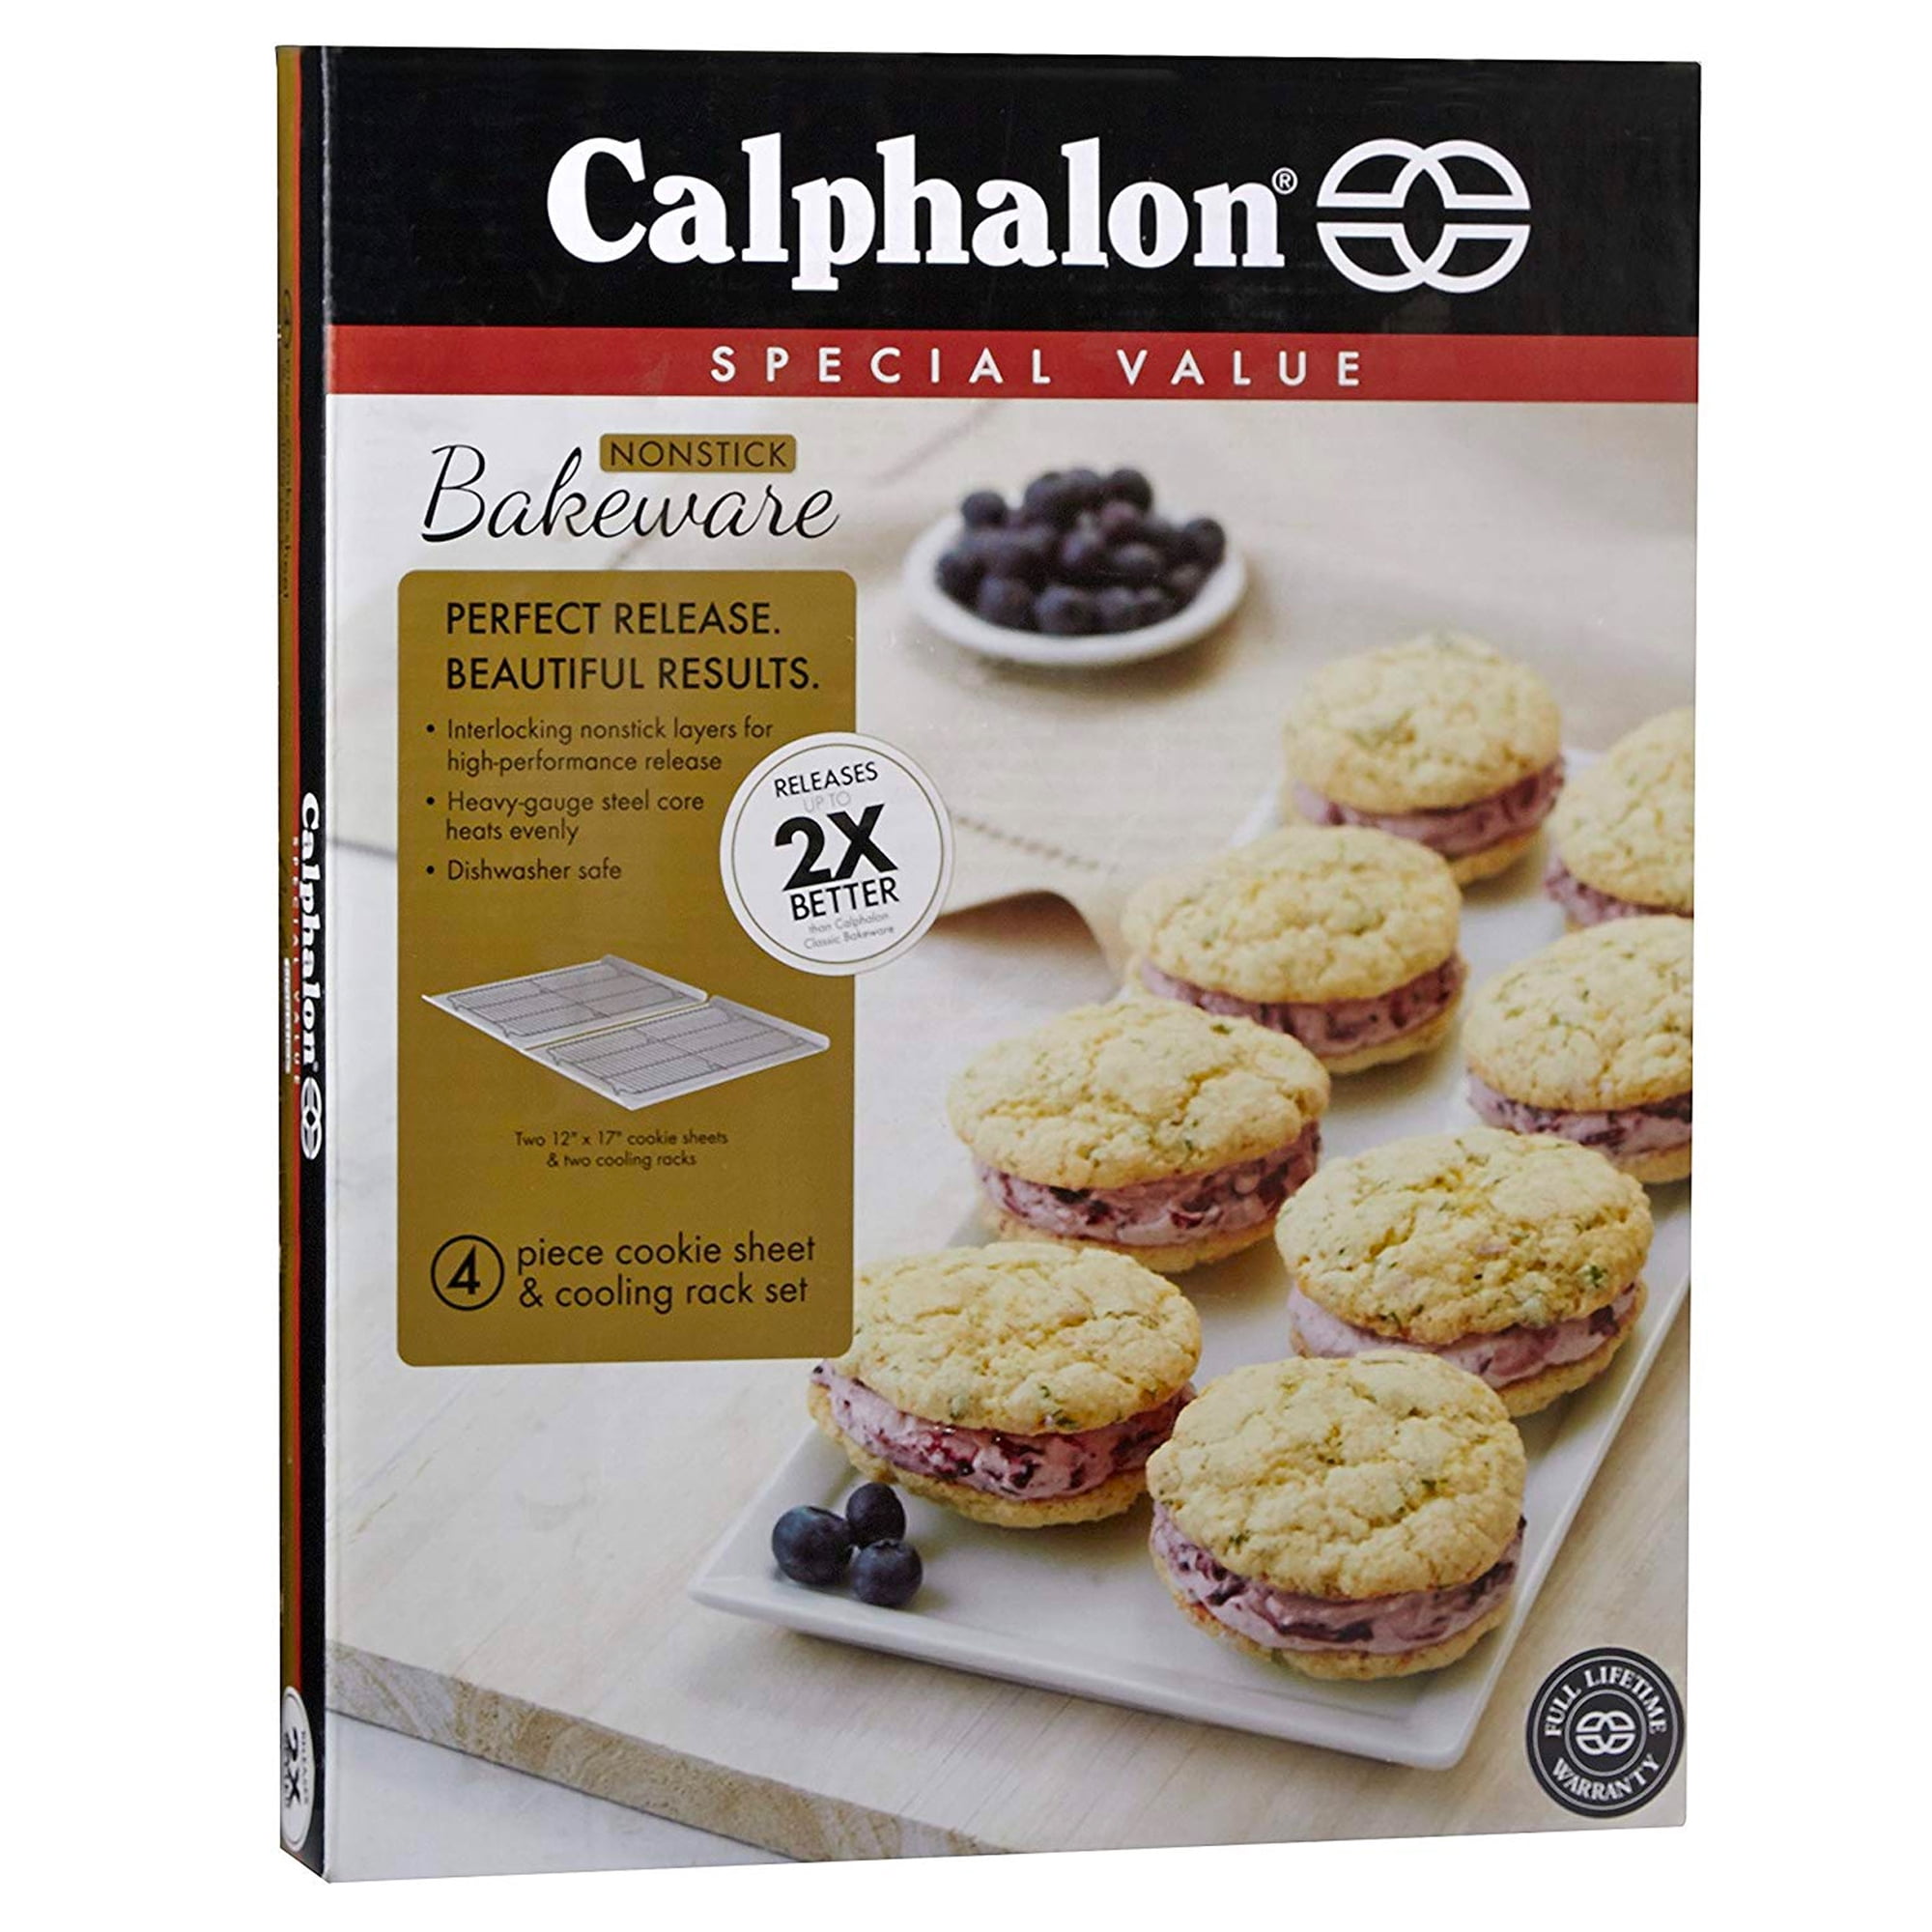  Calphalon Nonstick Bakeware, Cookie Sheet, 14-inch by 17-inch